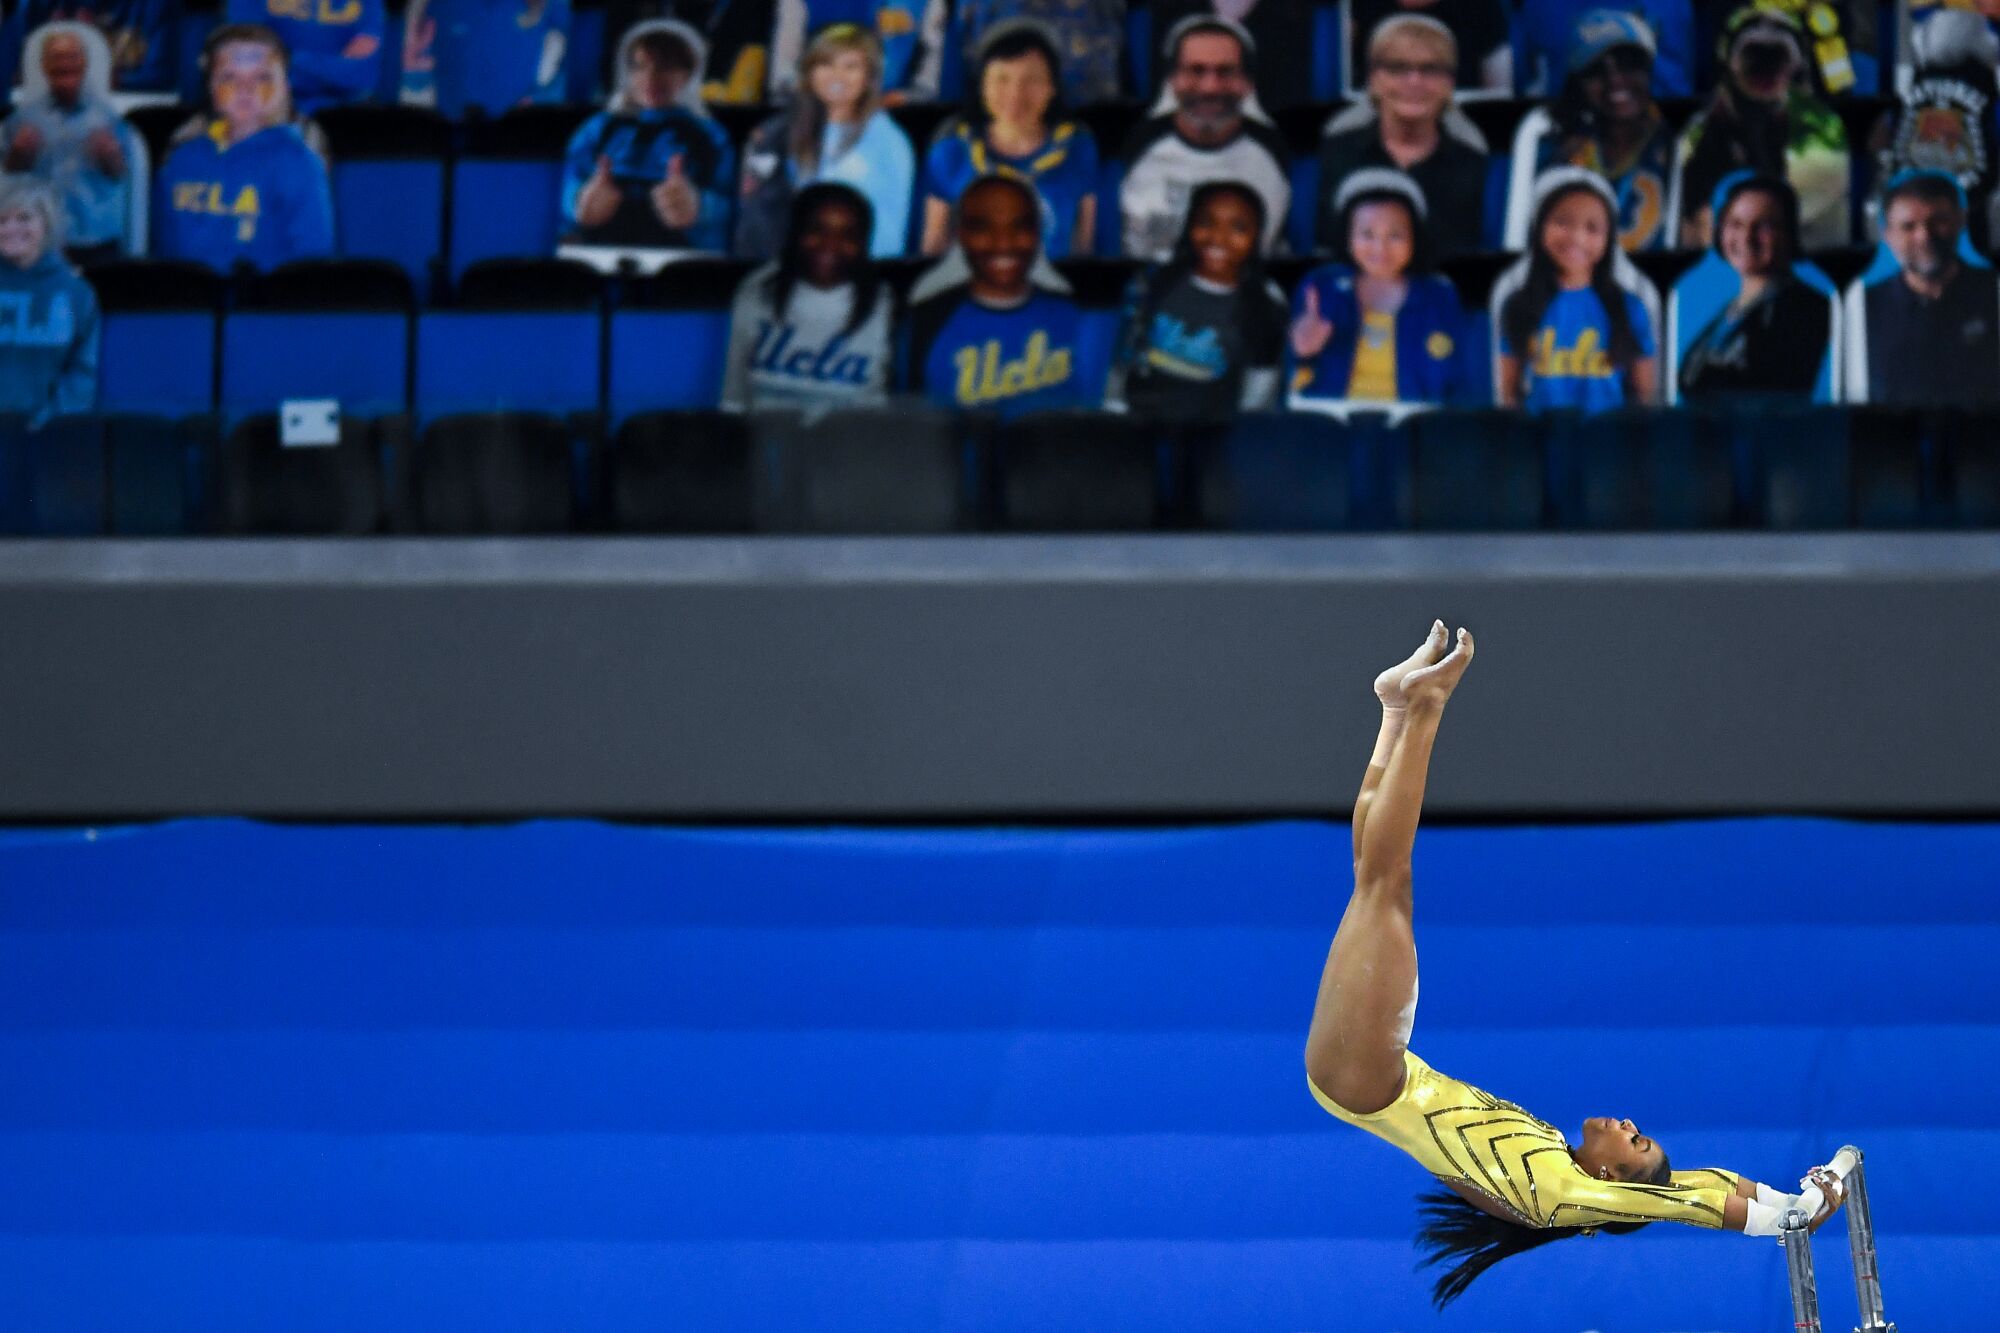 Feb. 10: UCLA gymnast Nia Dennis swings with her legs pointed up on the uneven bars. 